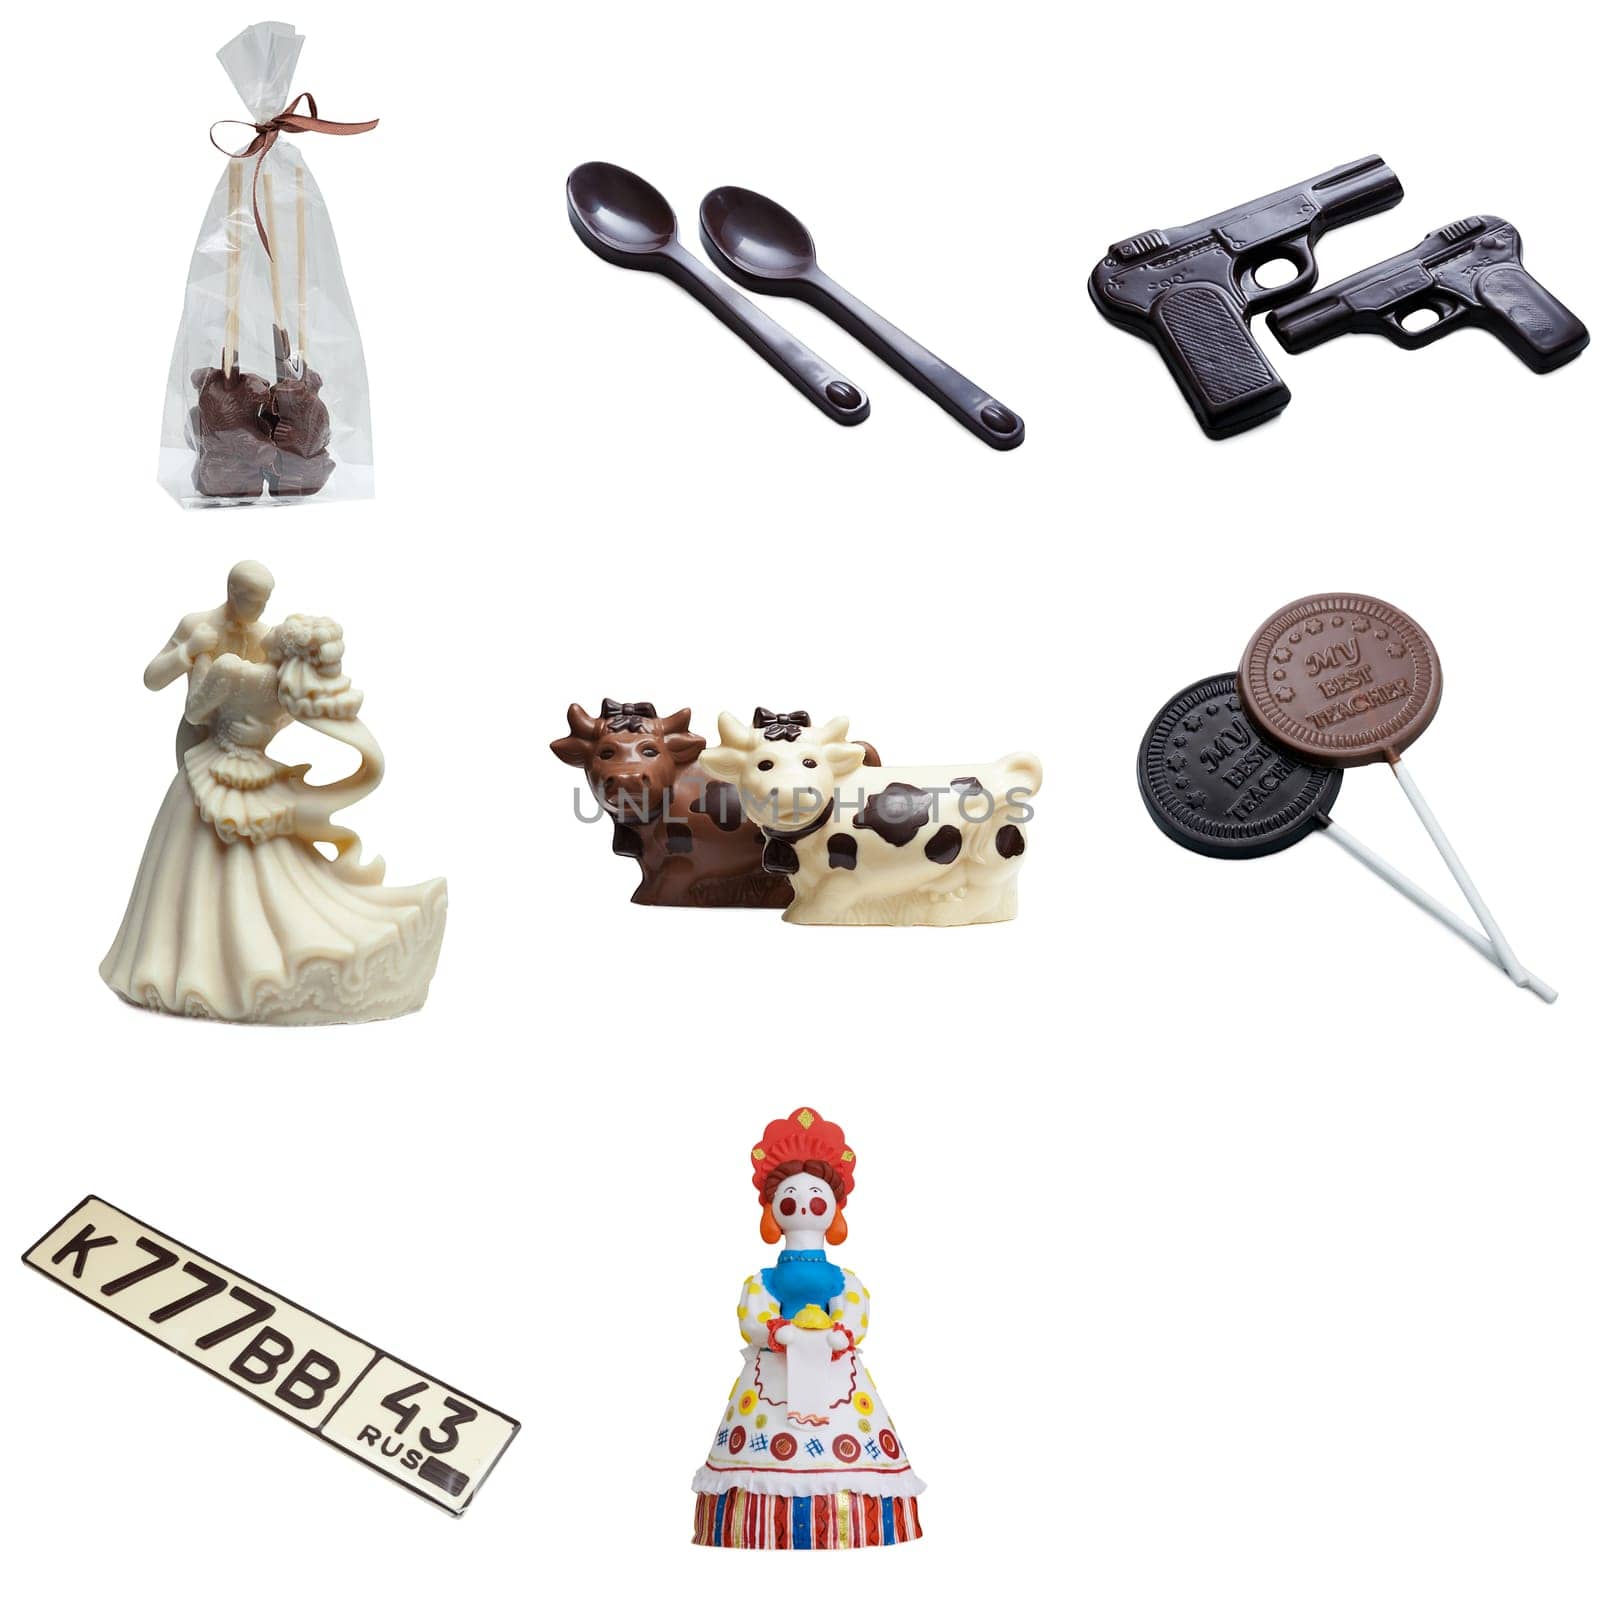 Gift chocolates in form of amusing figures by rivertime